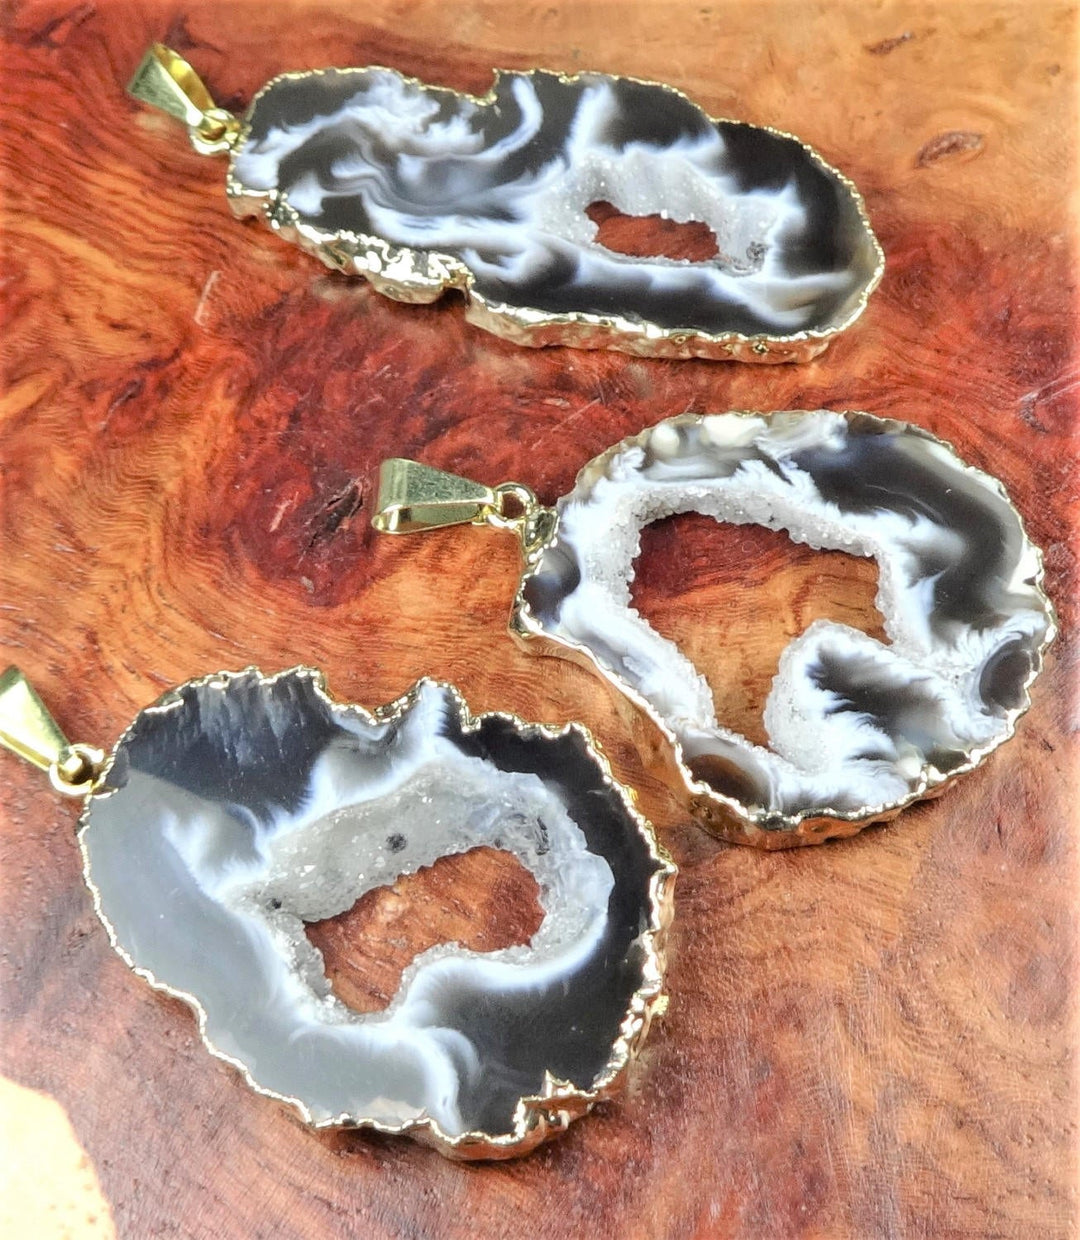 Bulk Wholesale Lot Of 5 Pieces - Oco Geode Slice Pendant - Gold Plated Crystal Slab Charm Bead Necklace Supply